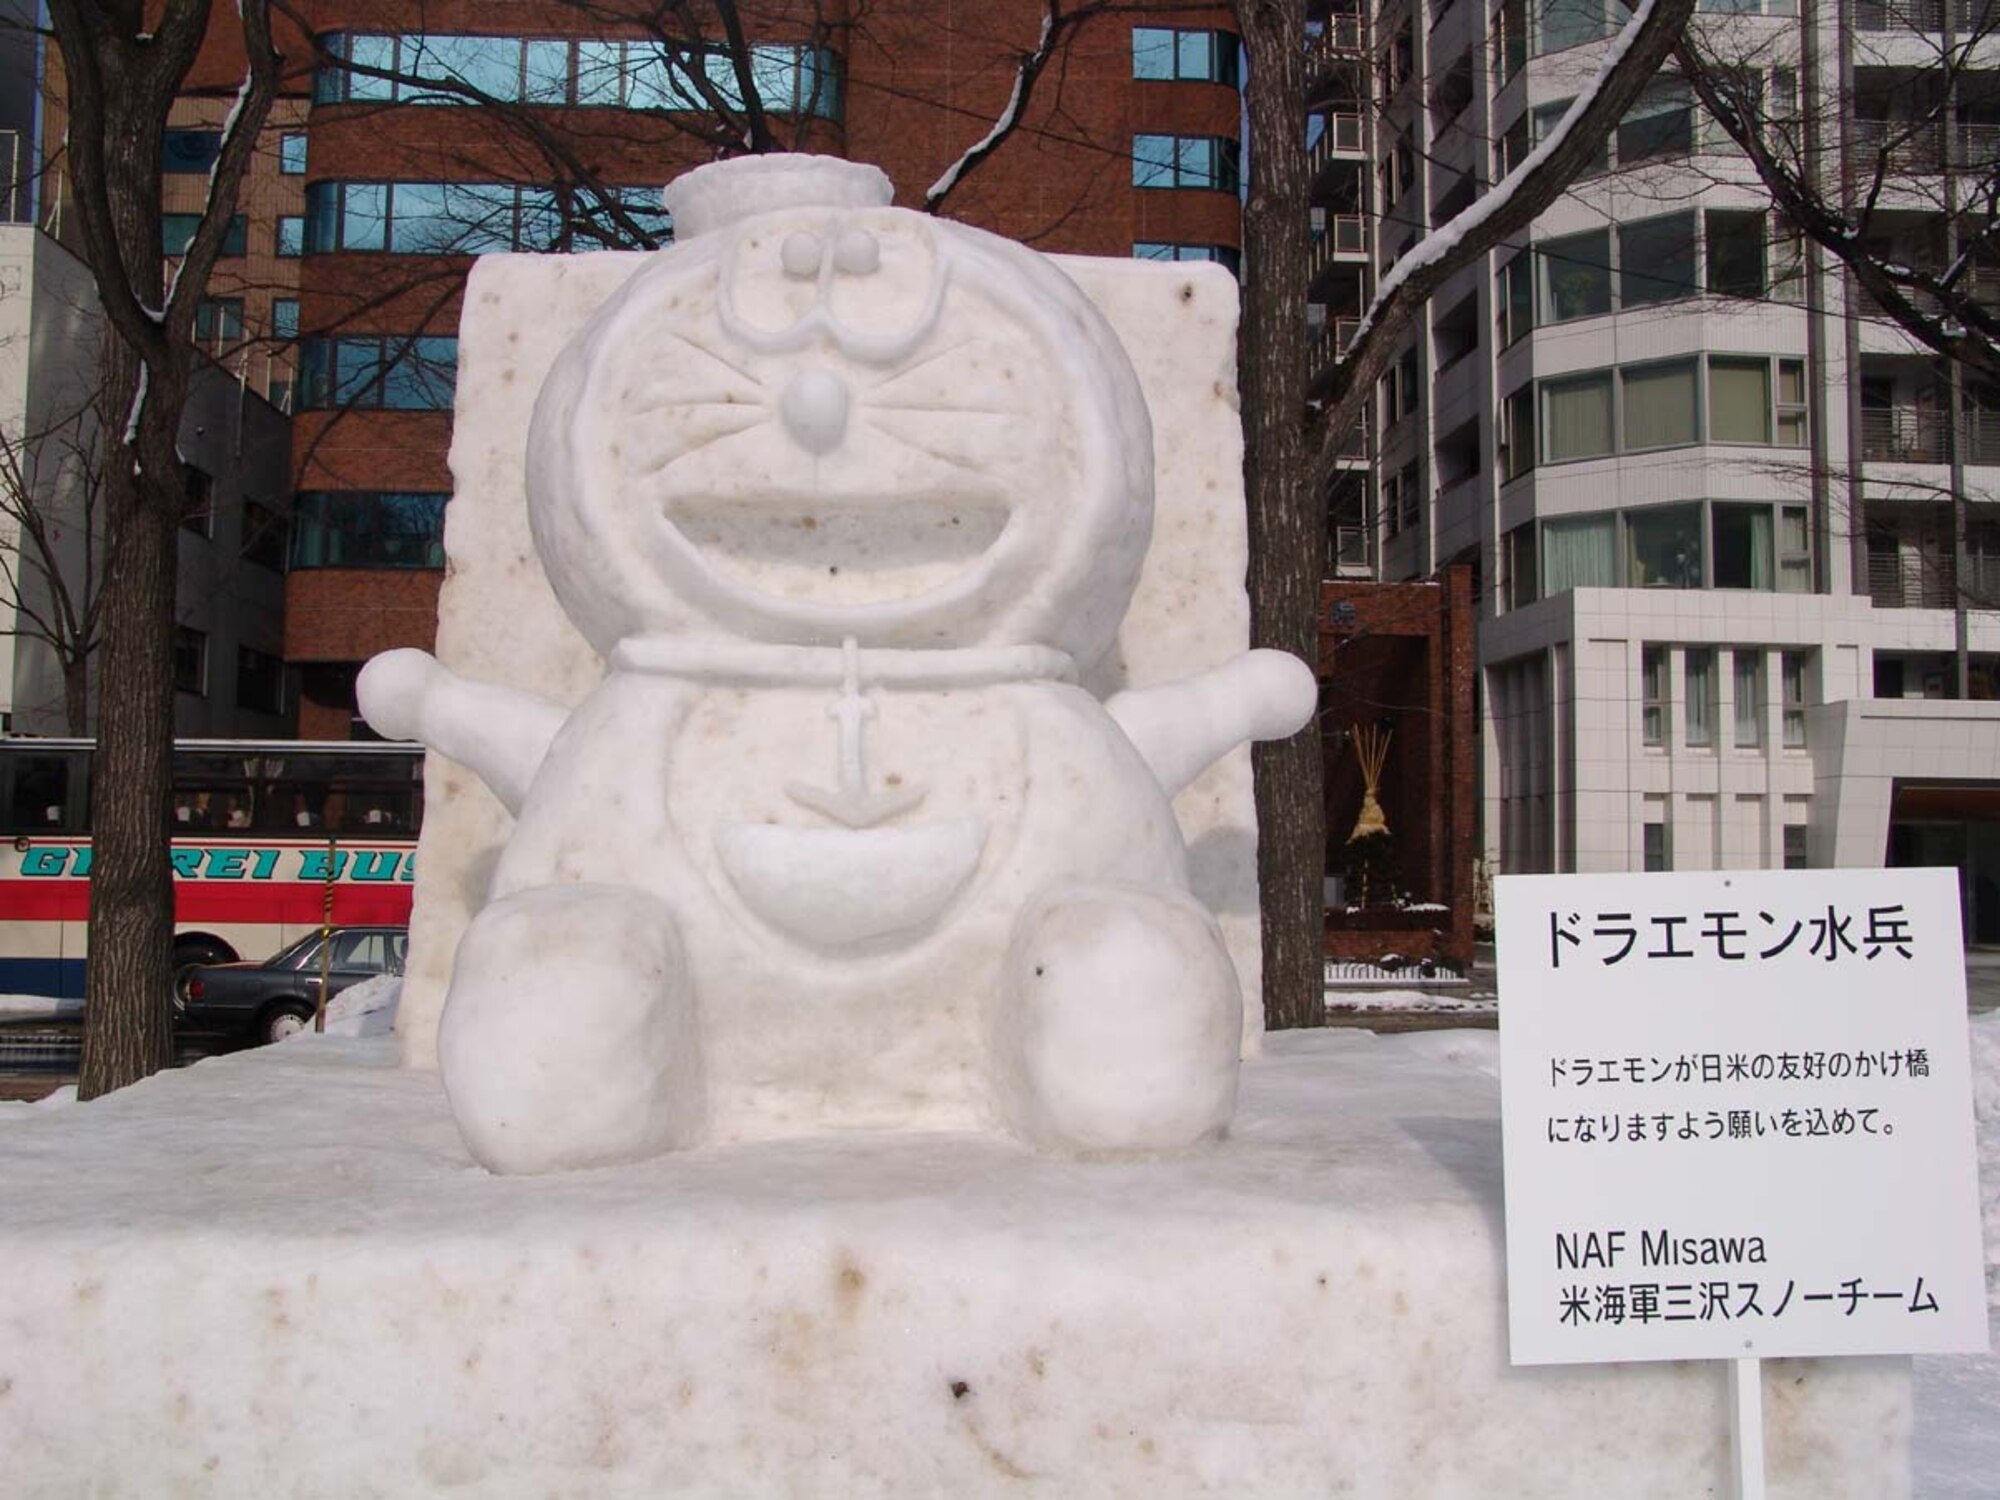 070207- SAPPORO, Japan -- Naval Air Facility Misawa snow carving team's entrance into the Sapporao Snow Festival, which was held Feb. 6-12 in Sapporo, Japan. (Courtesy photo)